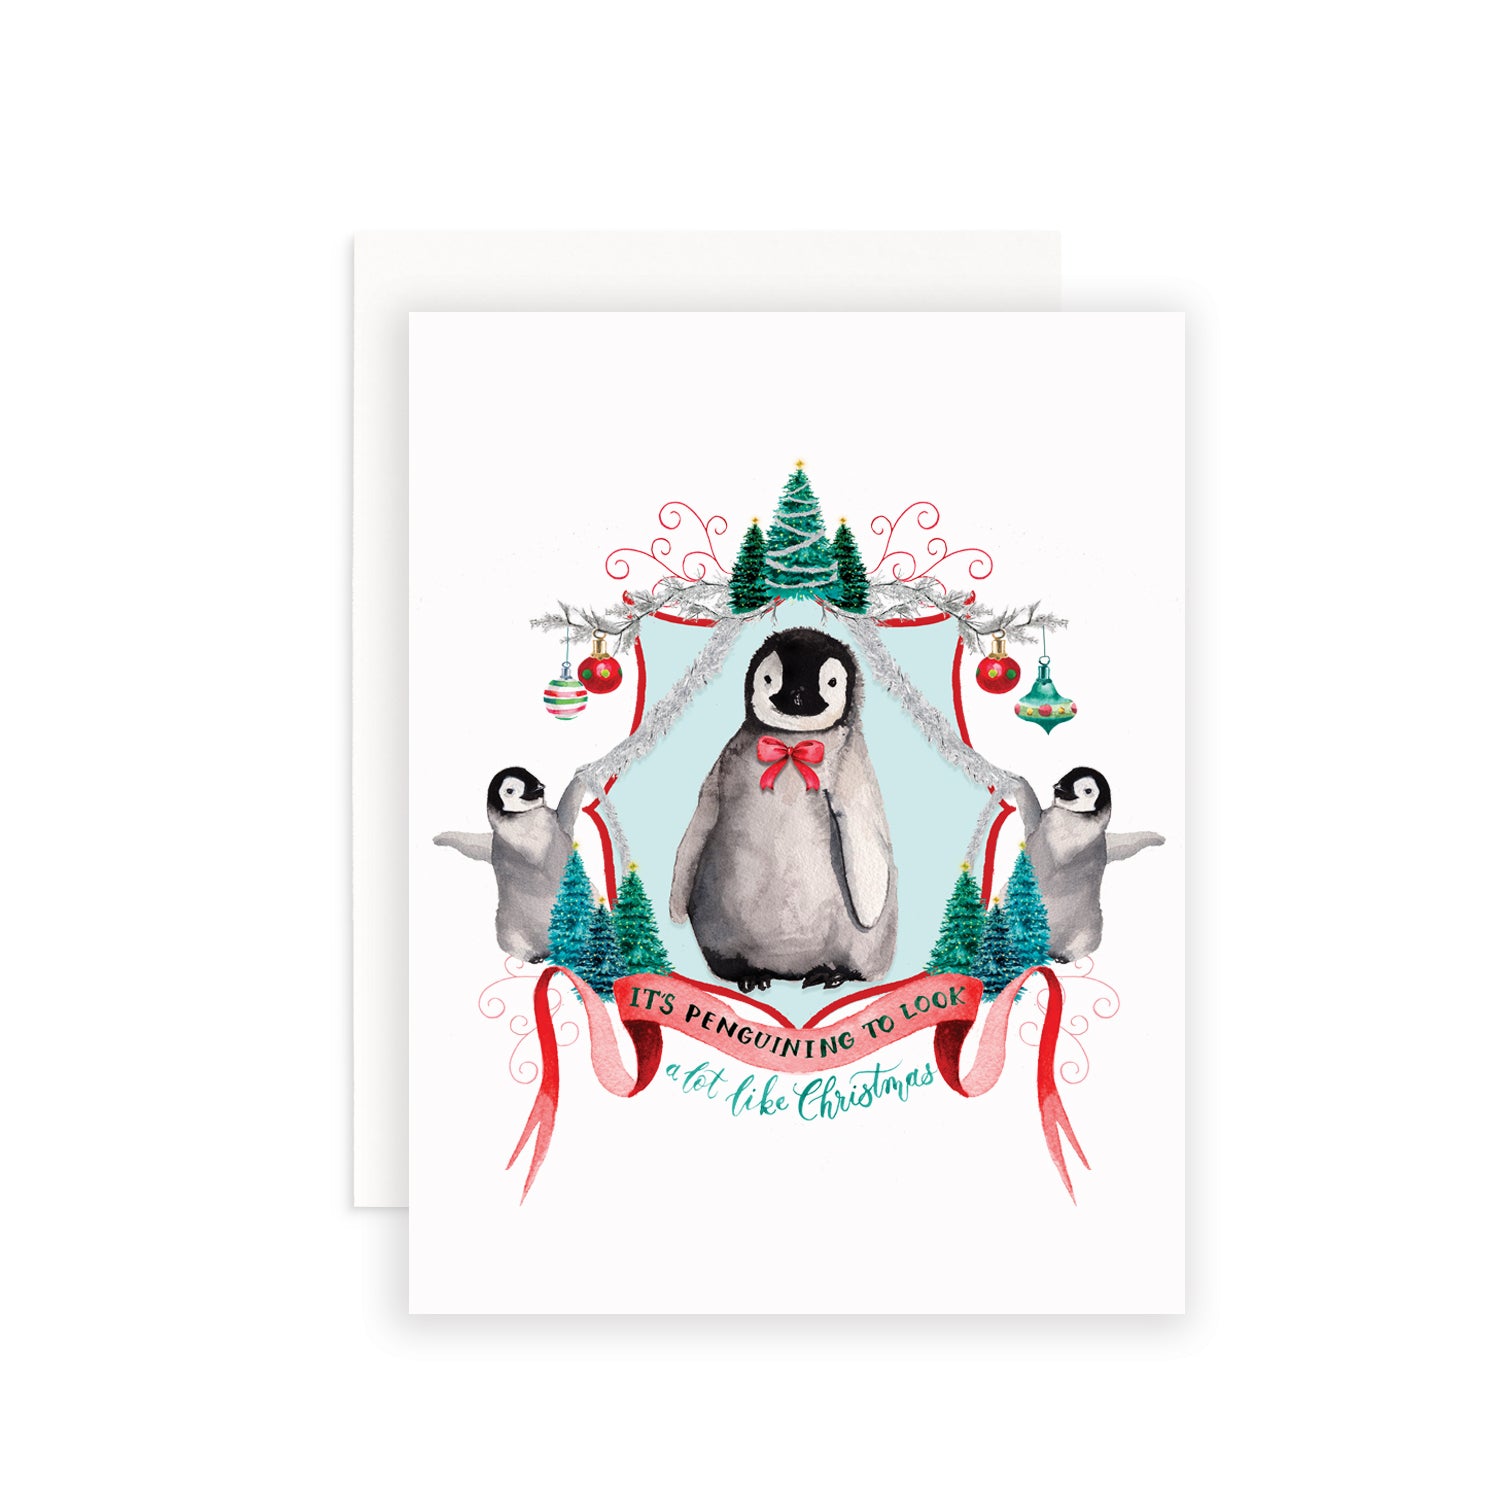 It's Penguining to Look a lot like Christmas Greeting Card